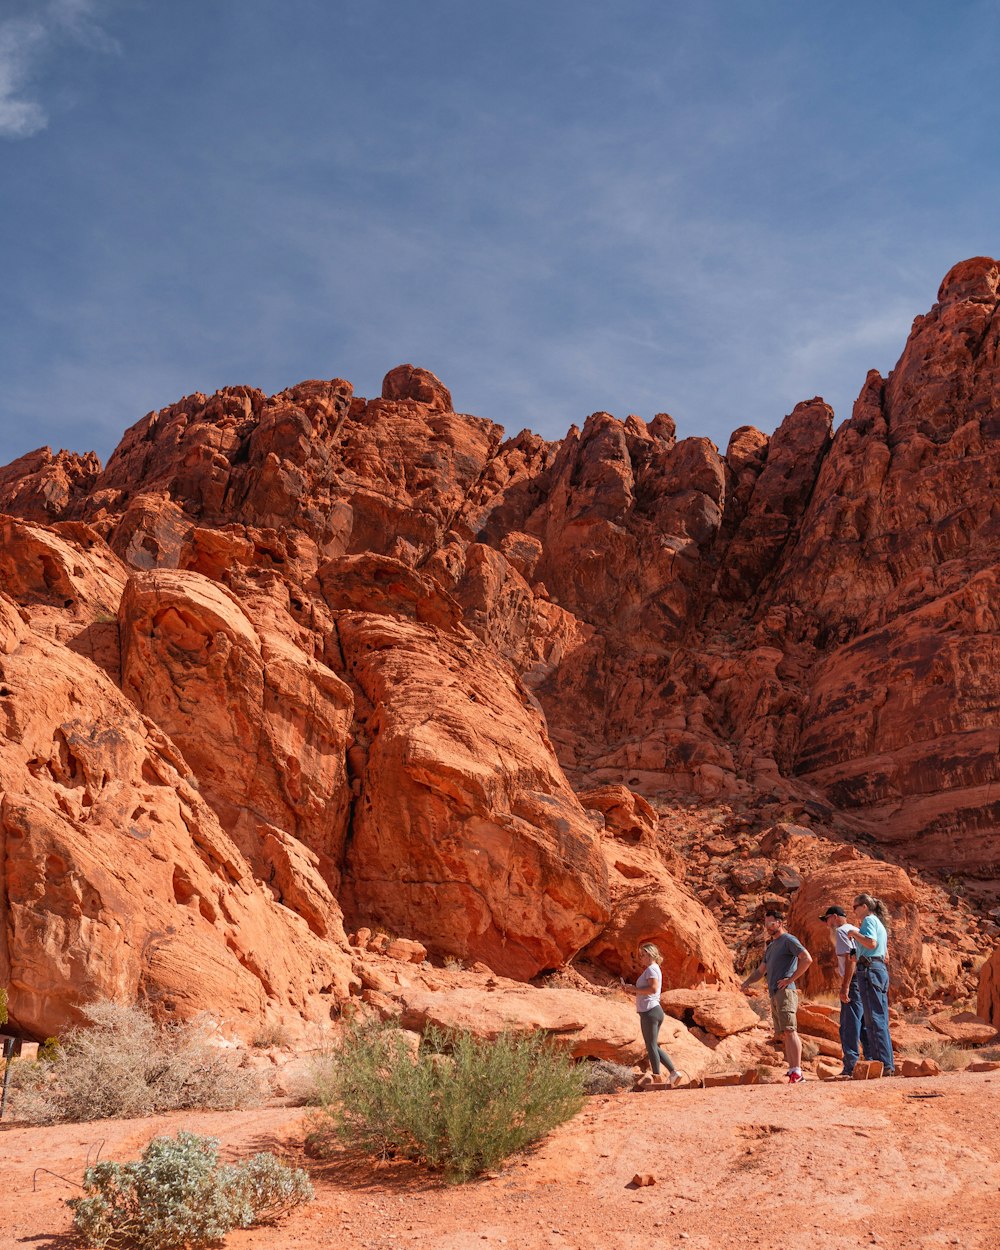 a group of people standing in front of a large red rock formation